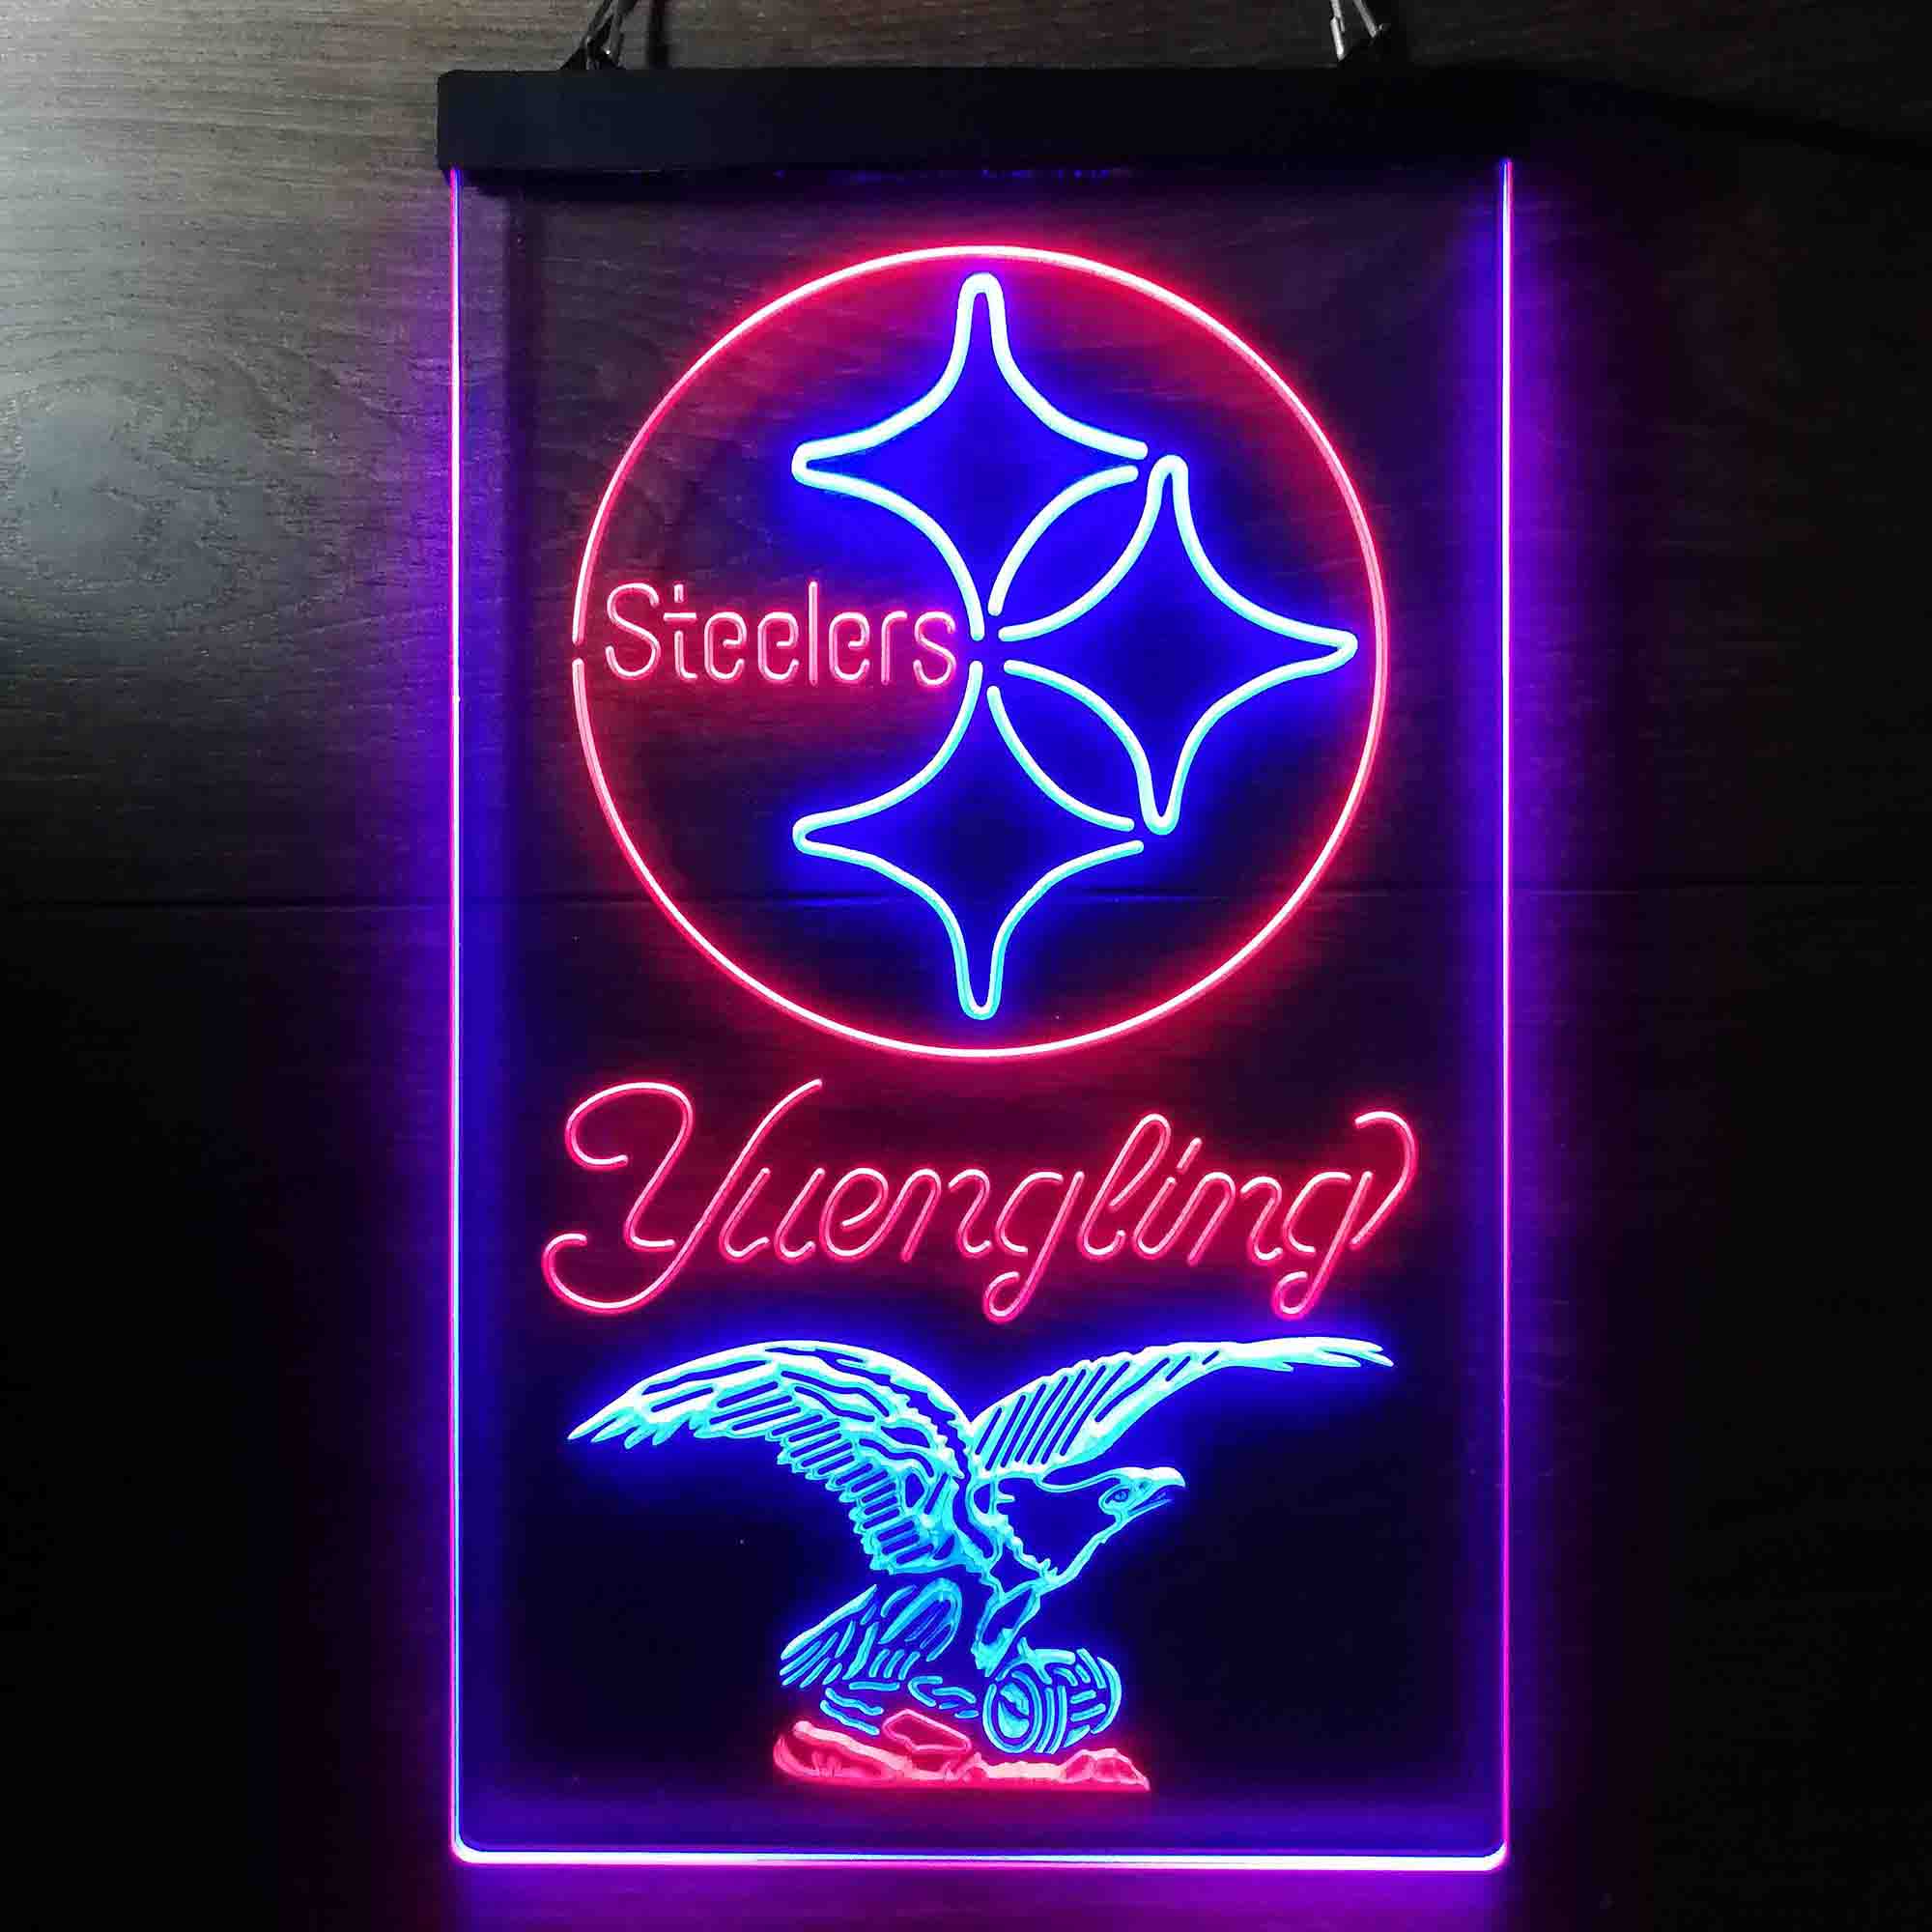 Yuengling Bar Pittsburgh Steelers Est. 1933 LED Neon Sign